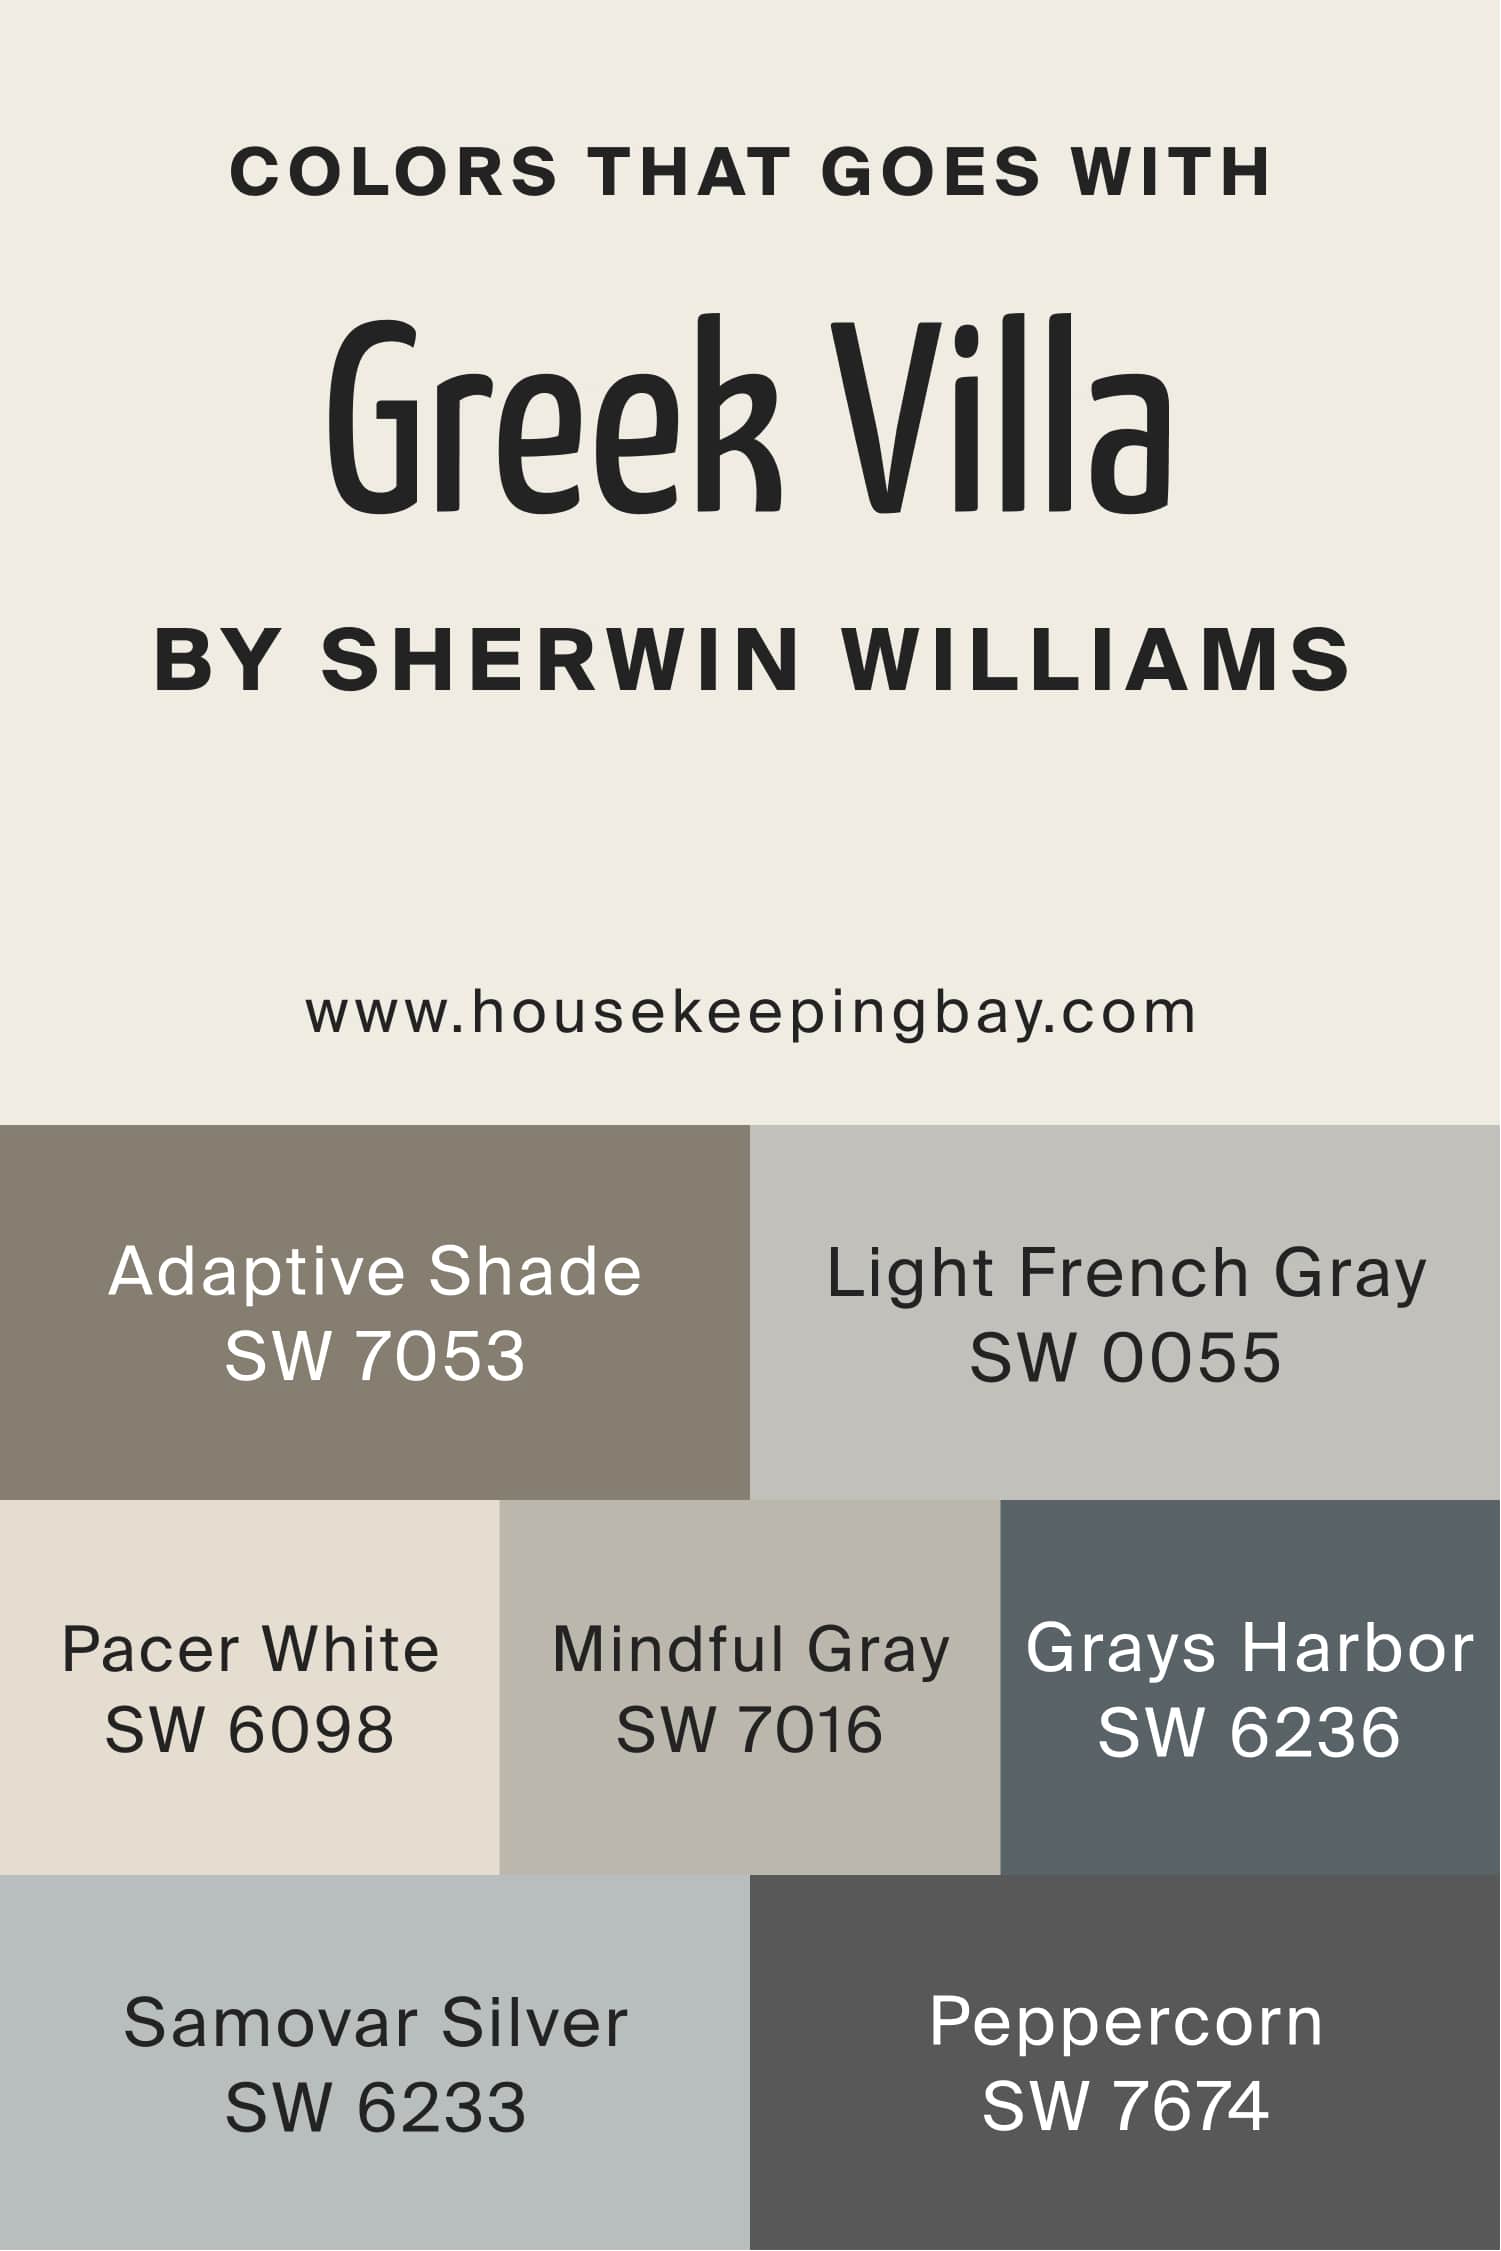 Colors that goes with Greek Villа by Sherwin Williams